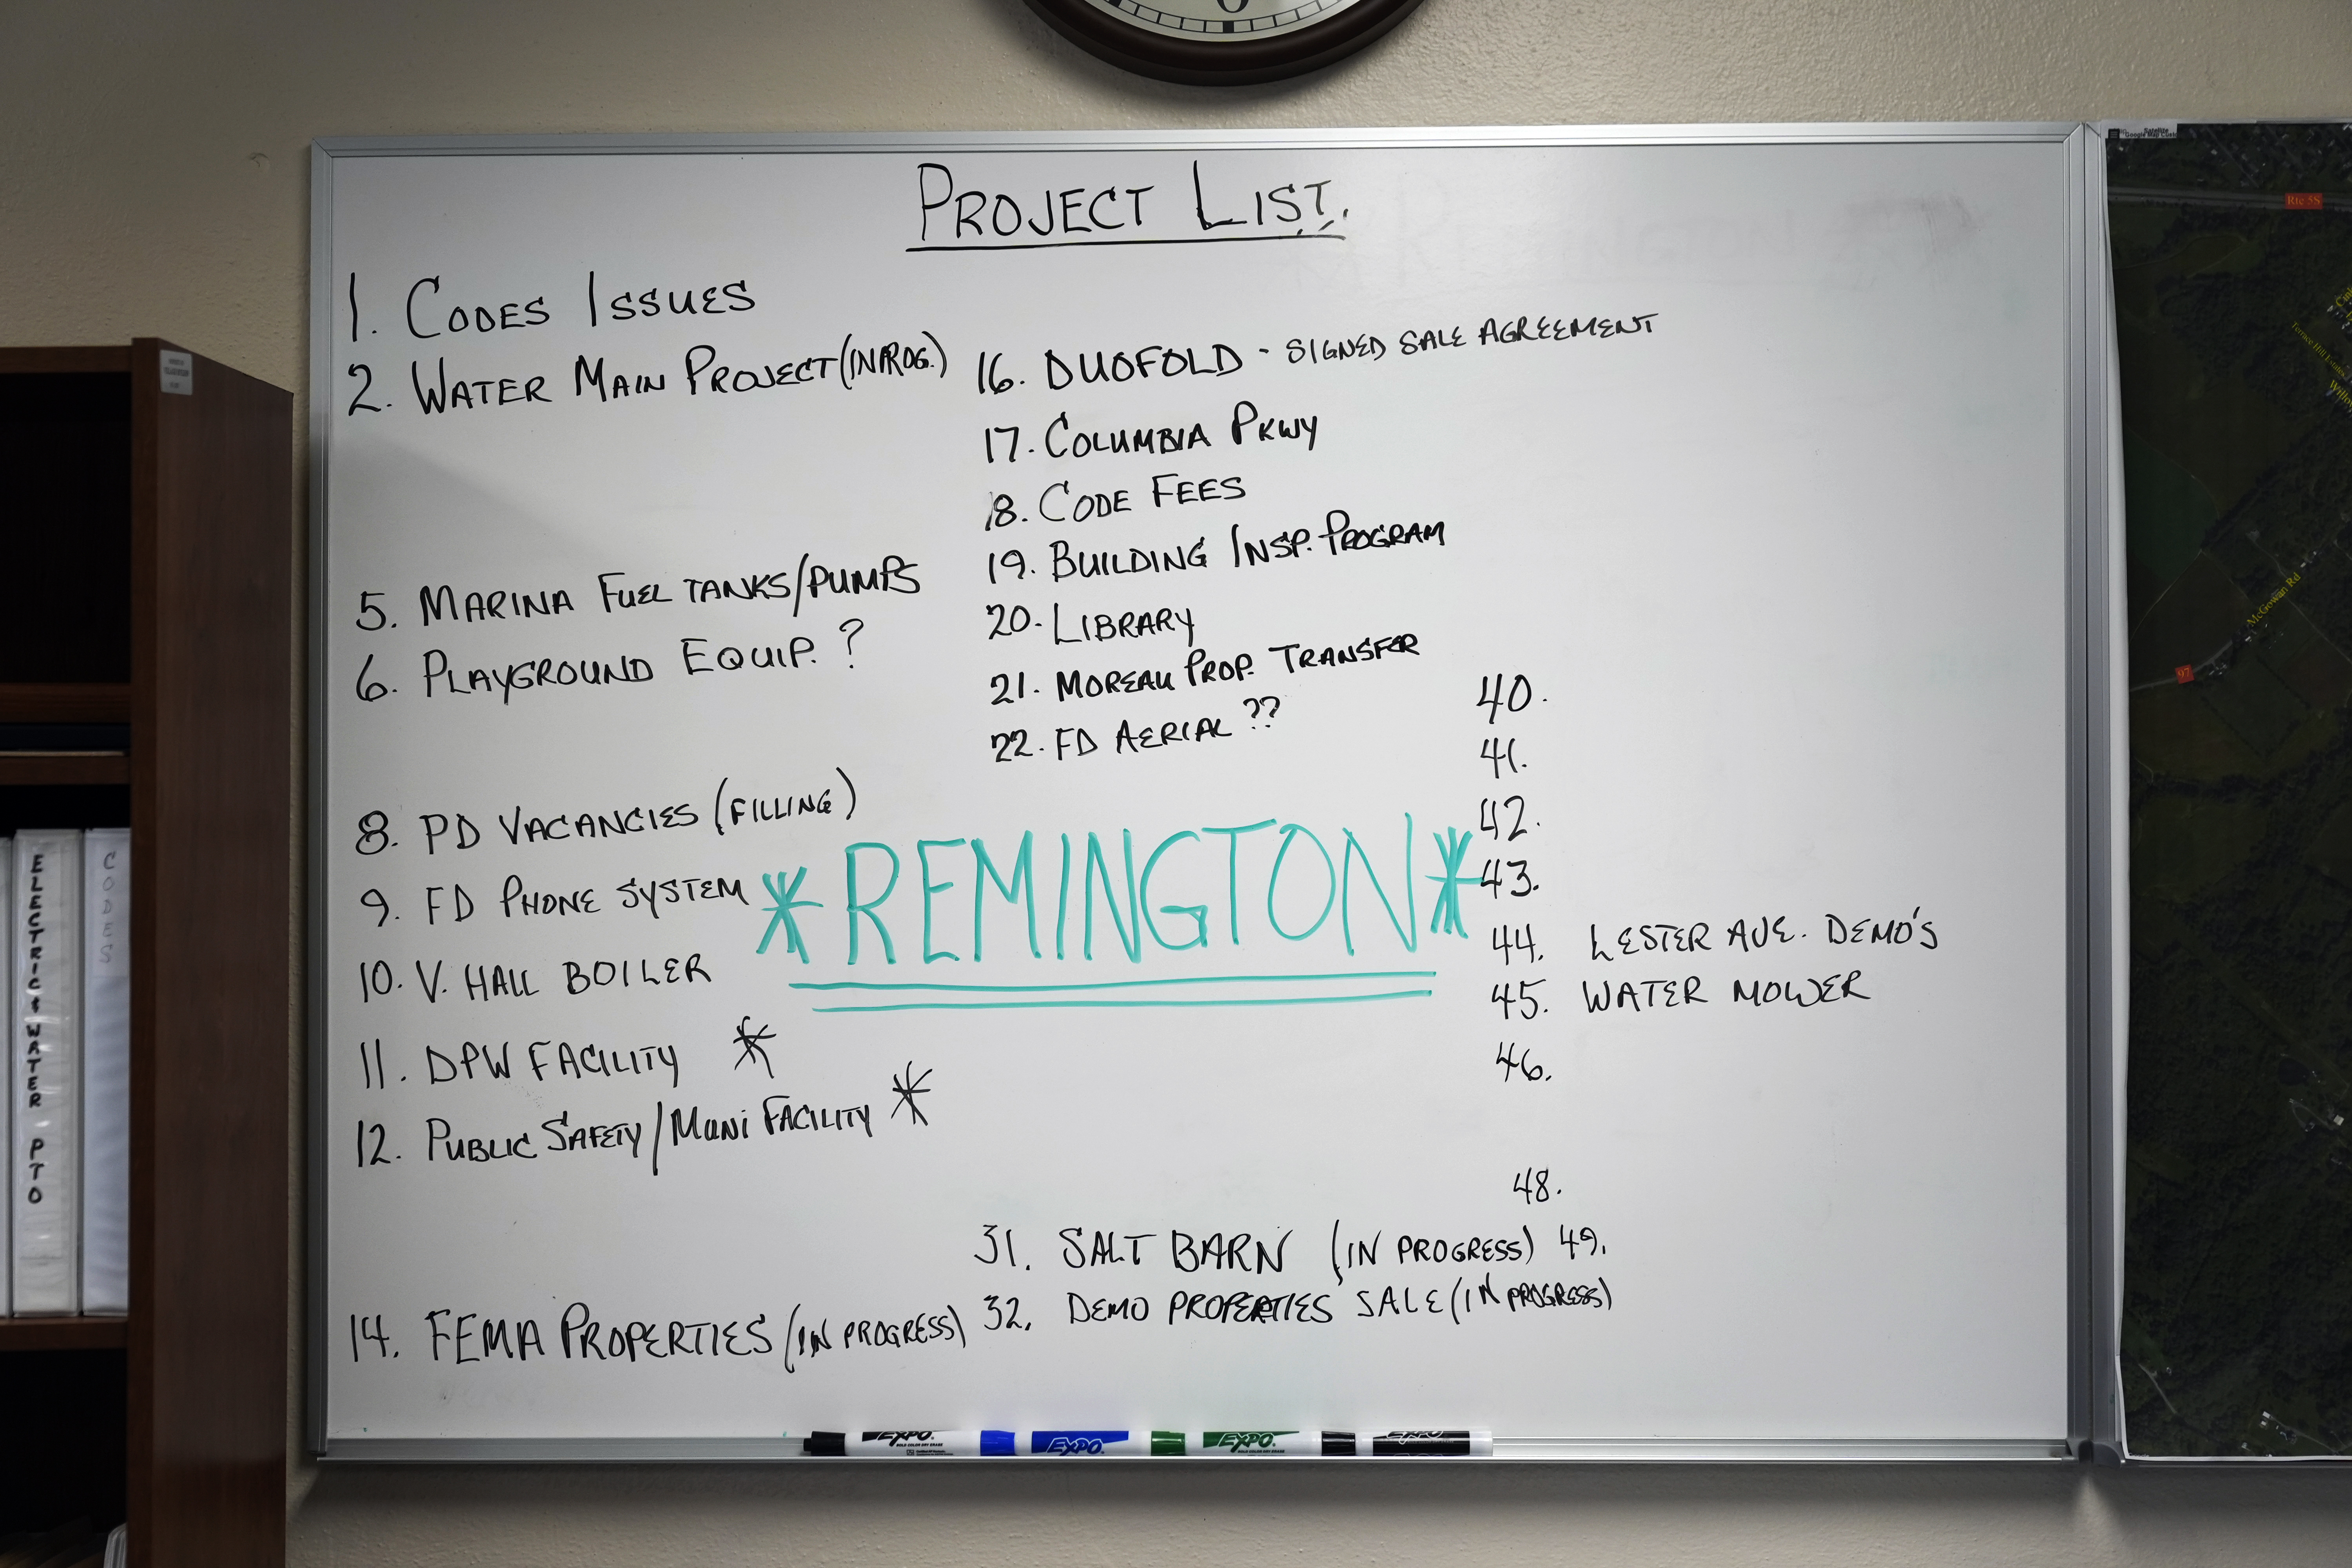 The project list in Ilion Mayor John Stephens' office includes the item "Remington" in large letters.